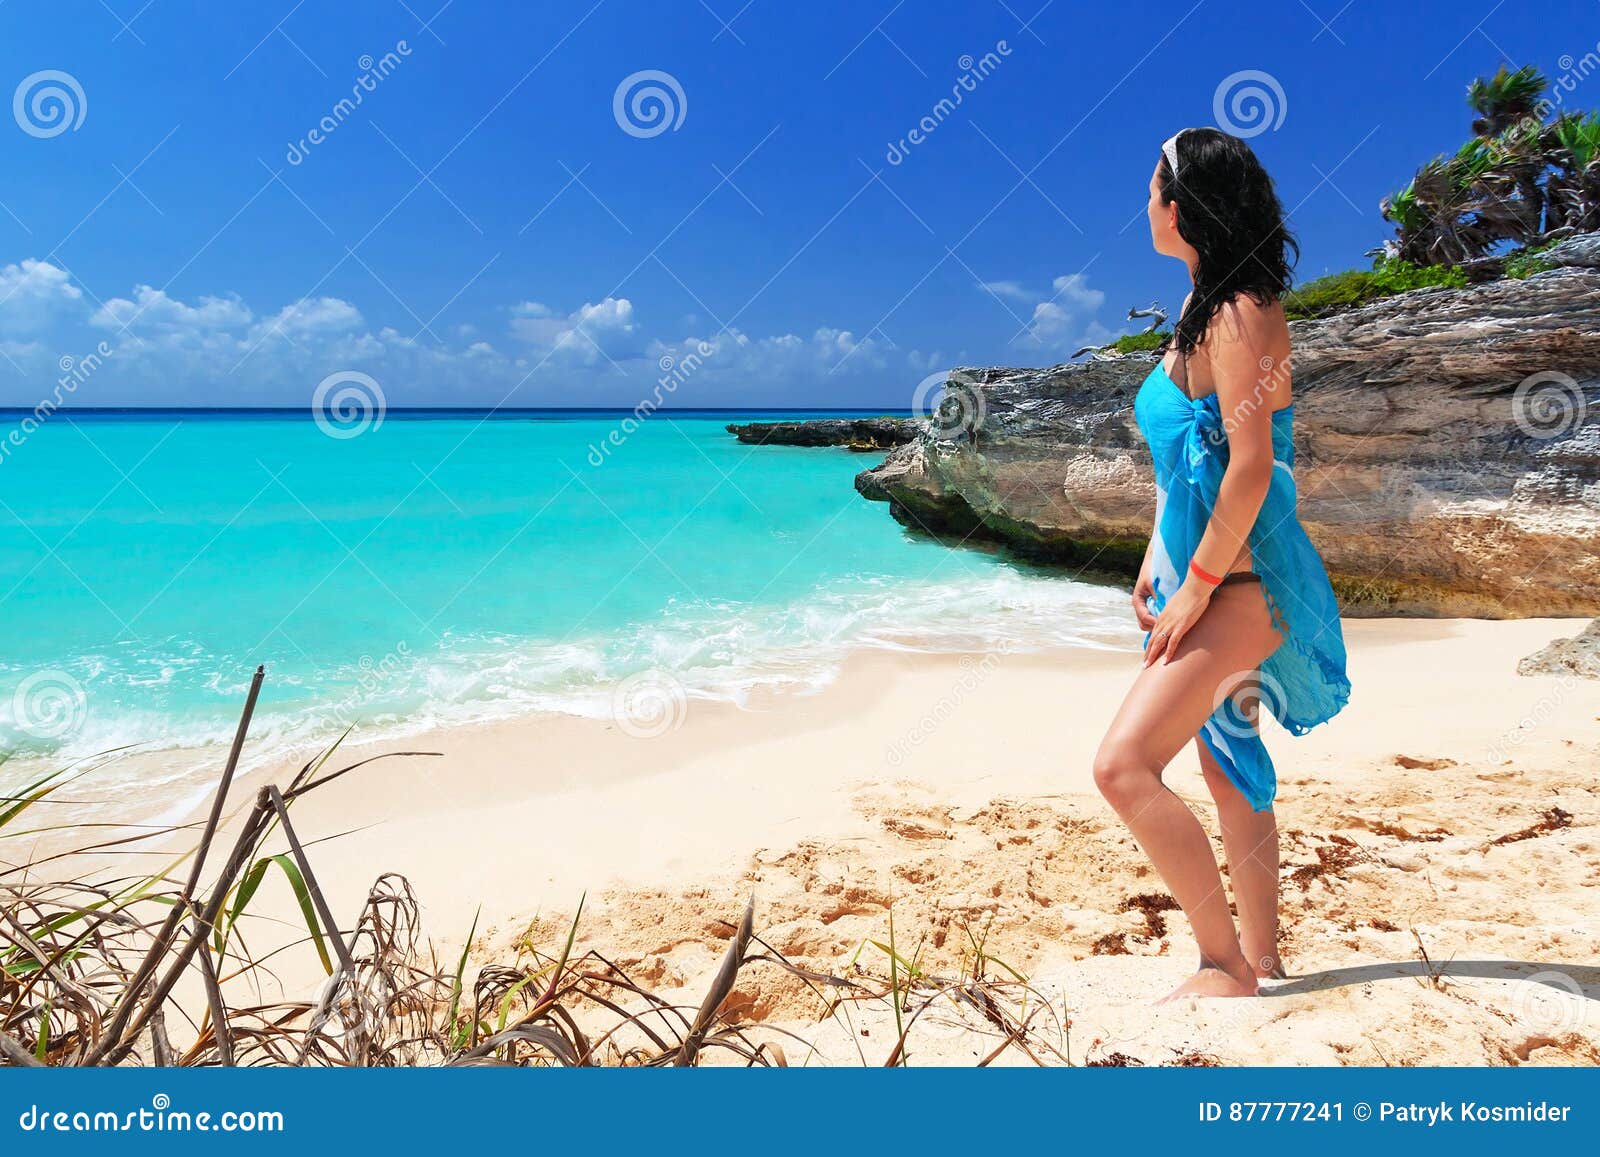 woman enjoing sun holidays at the beach